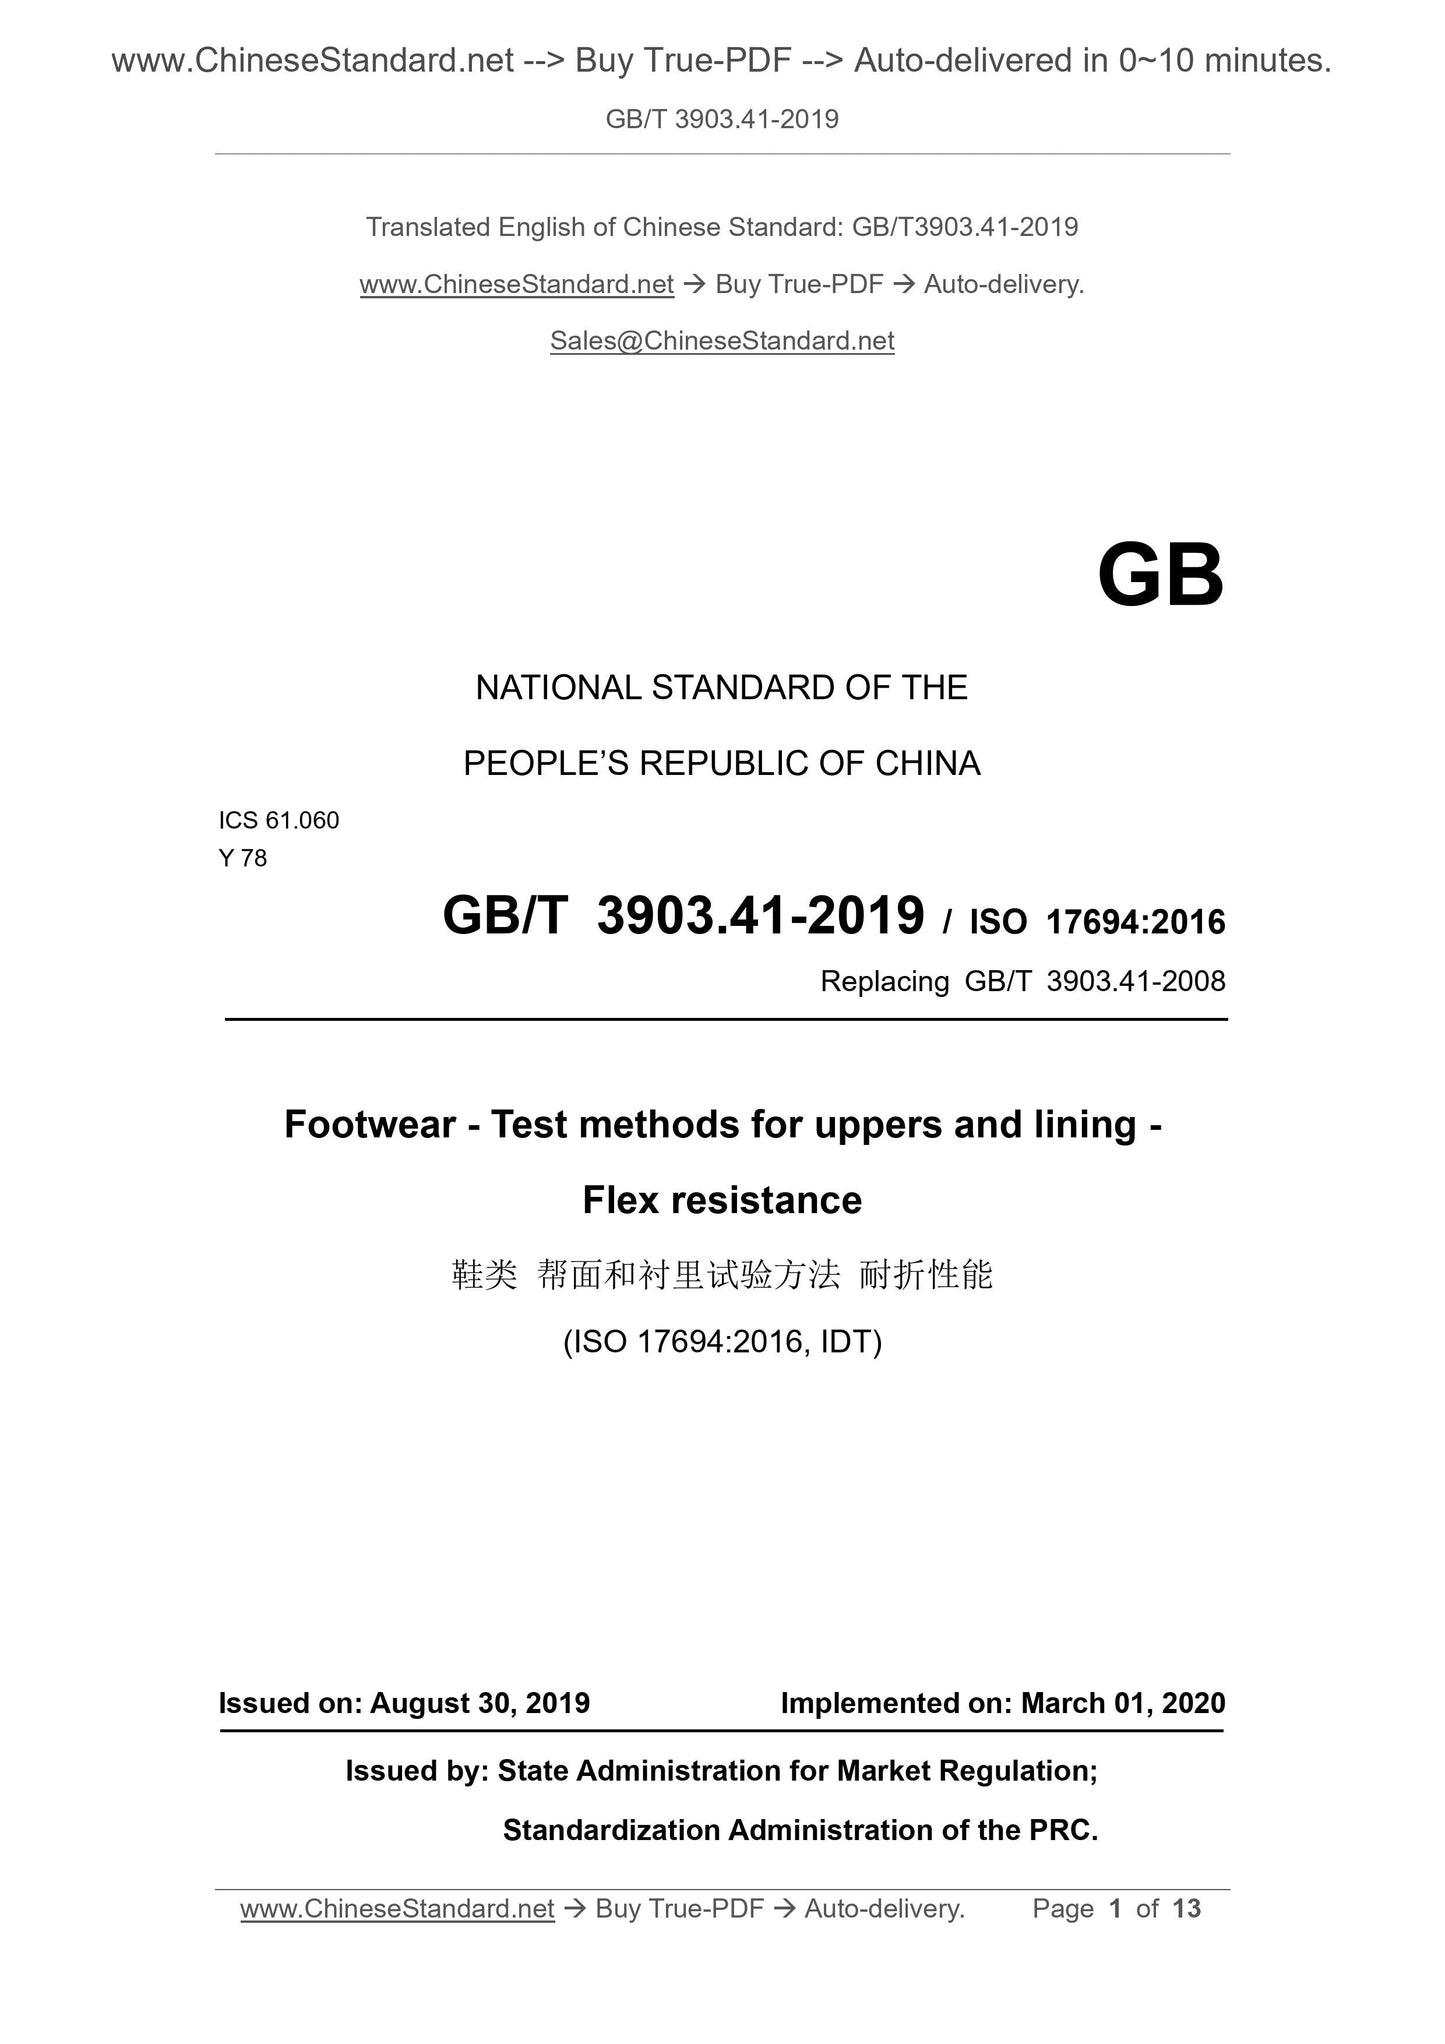 GB/T 3903.41-2019 Page 1